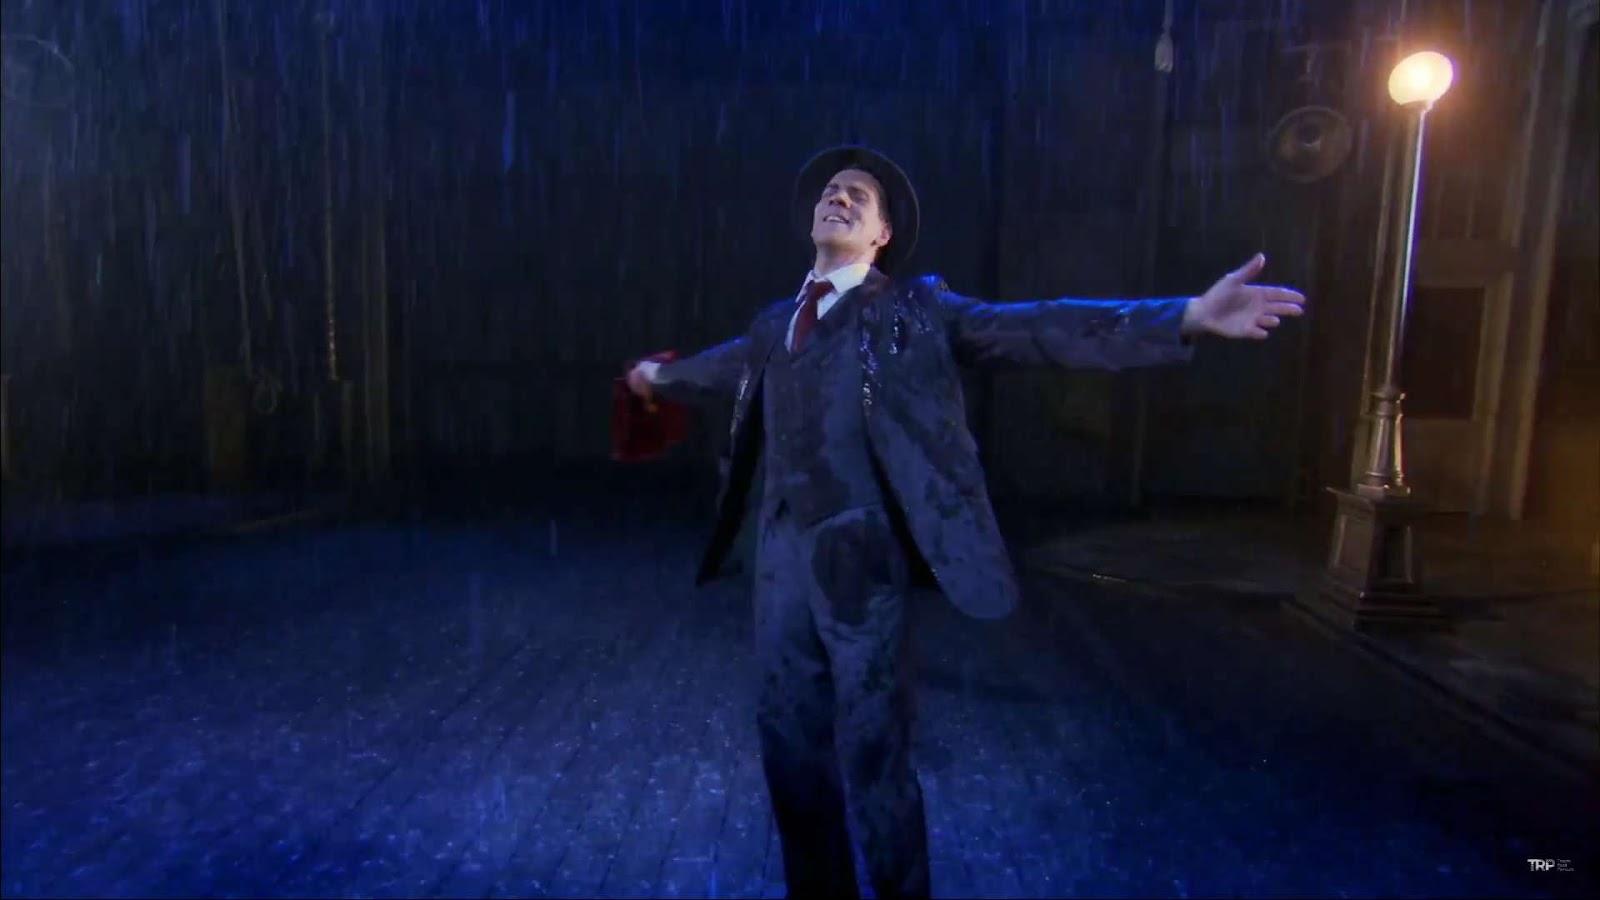 Part of a play called Singing in the Rain